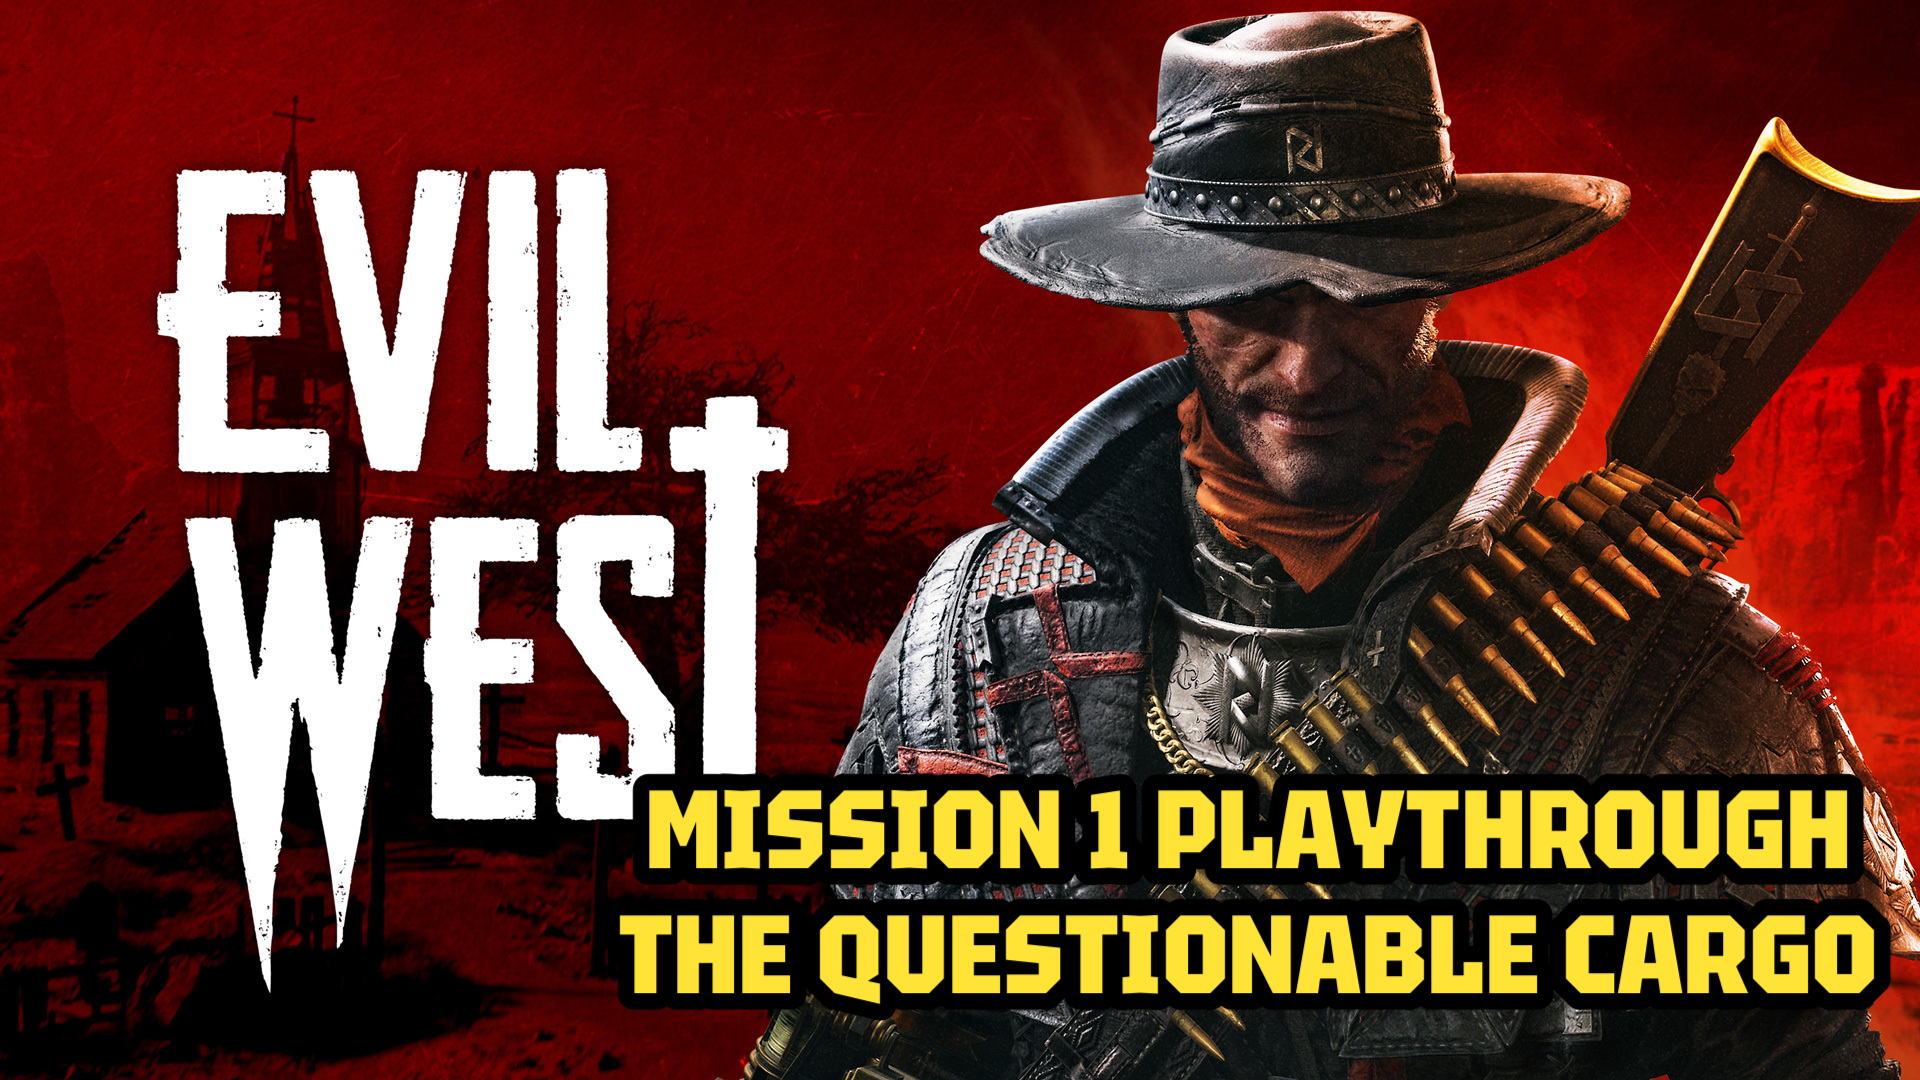 EVIL WEST | MISSION 1 THE QUESTIONABLE CARGO | PLAYTHROUGH #evilwest #gameplay #wildwest